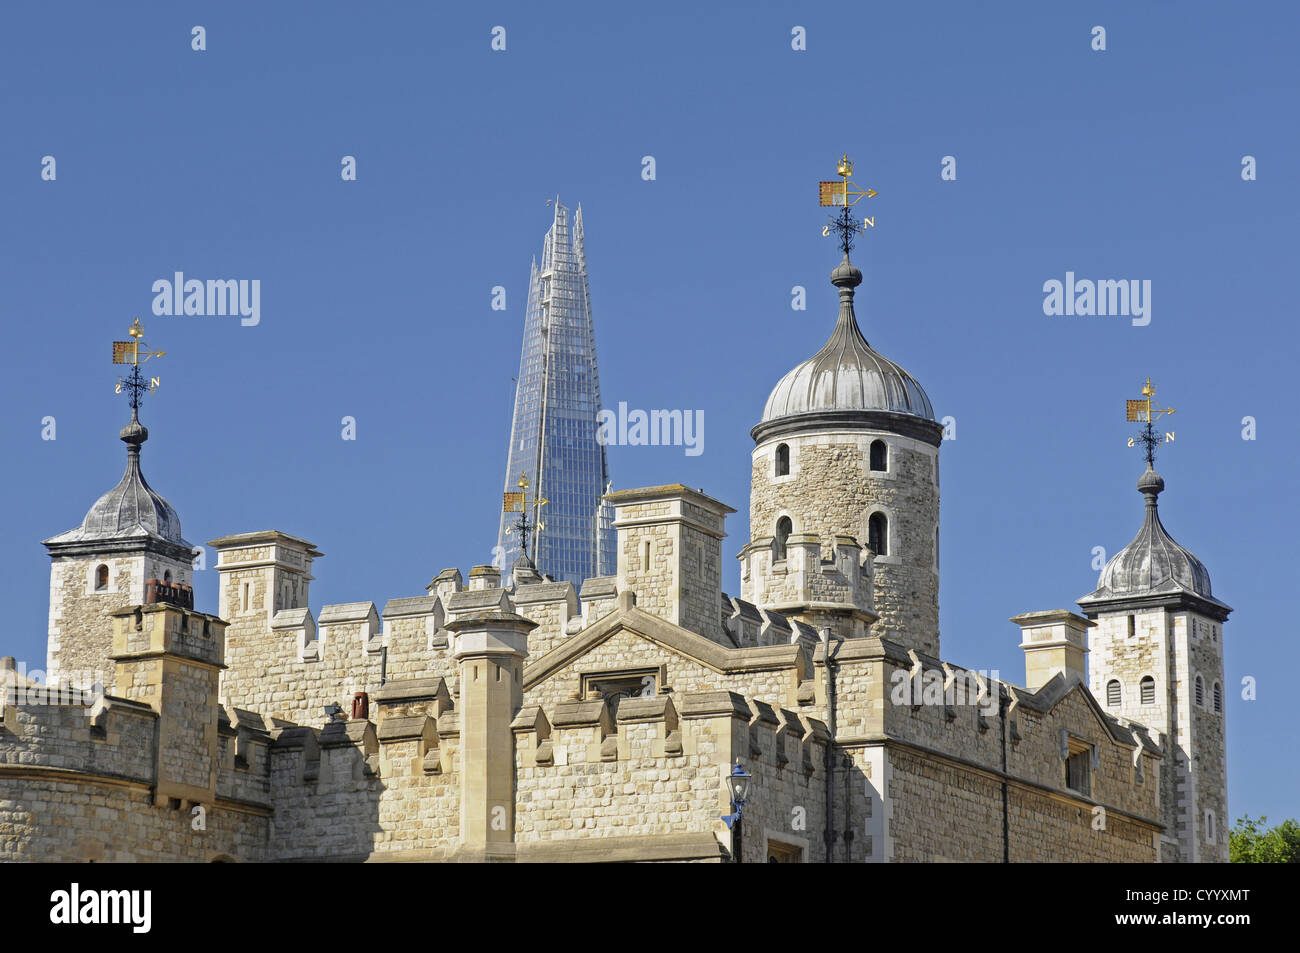 The Shard viewed from Tower of London Travel British Isles Destination Destinations Great Britain Londres Northern Europe UK Stock Photo